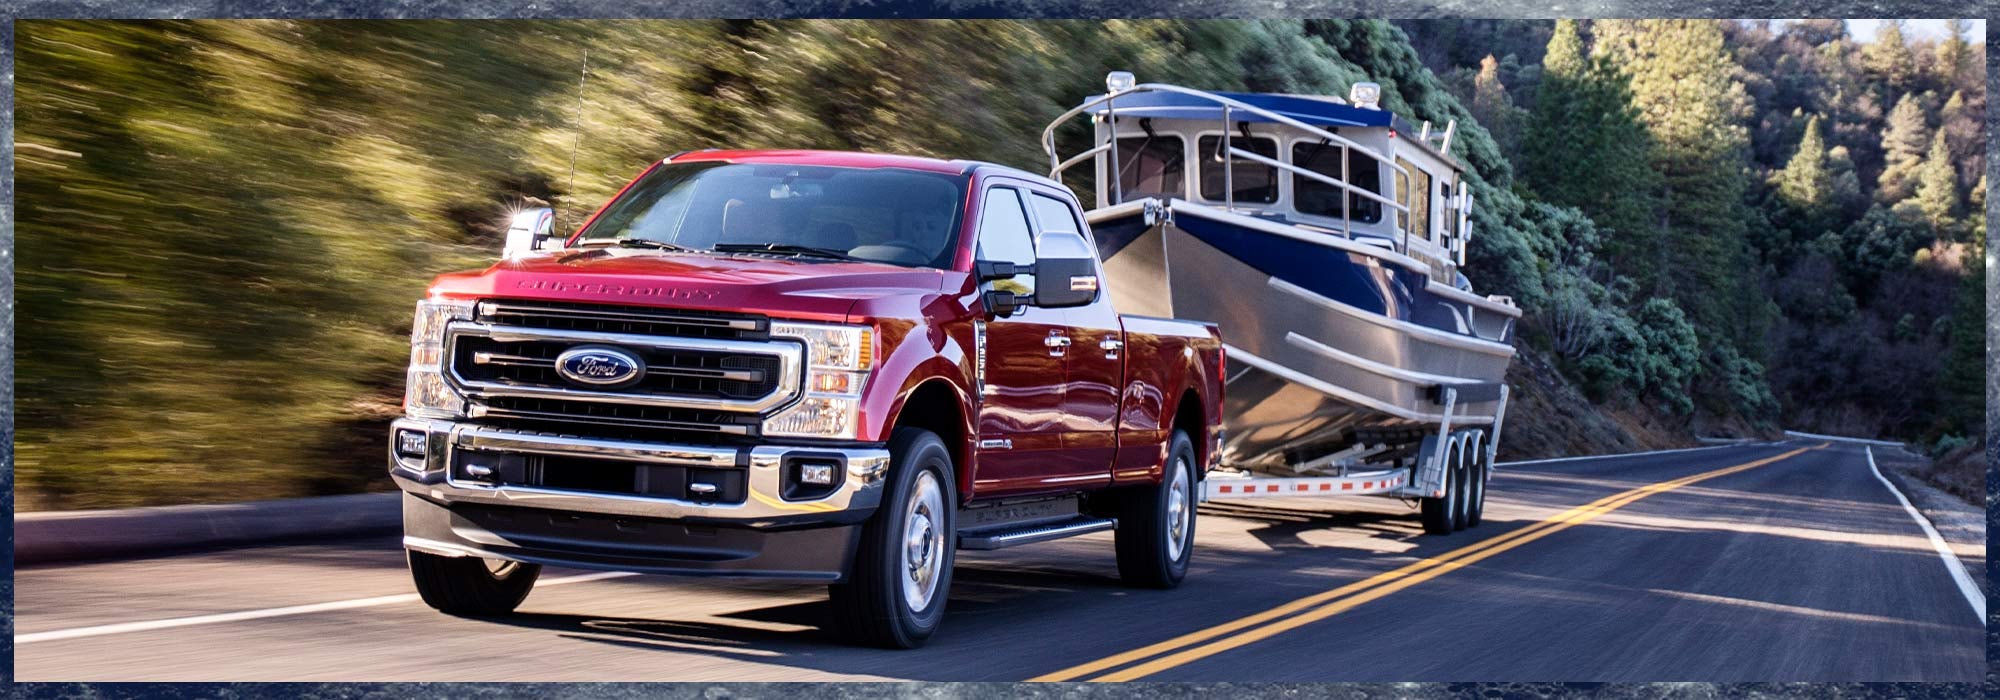 Ford F-250 trim levels explained